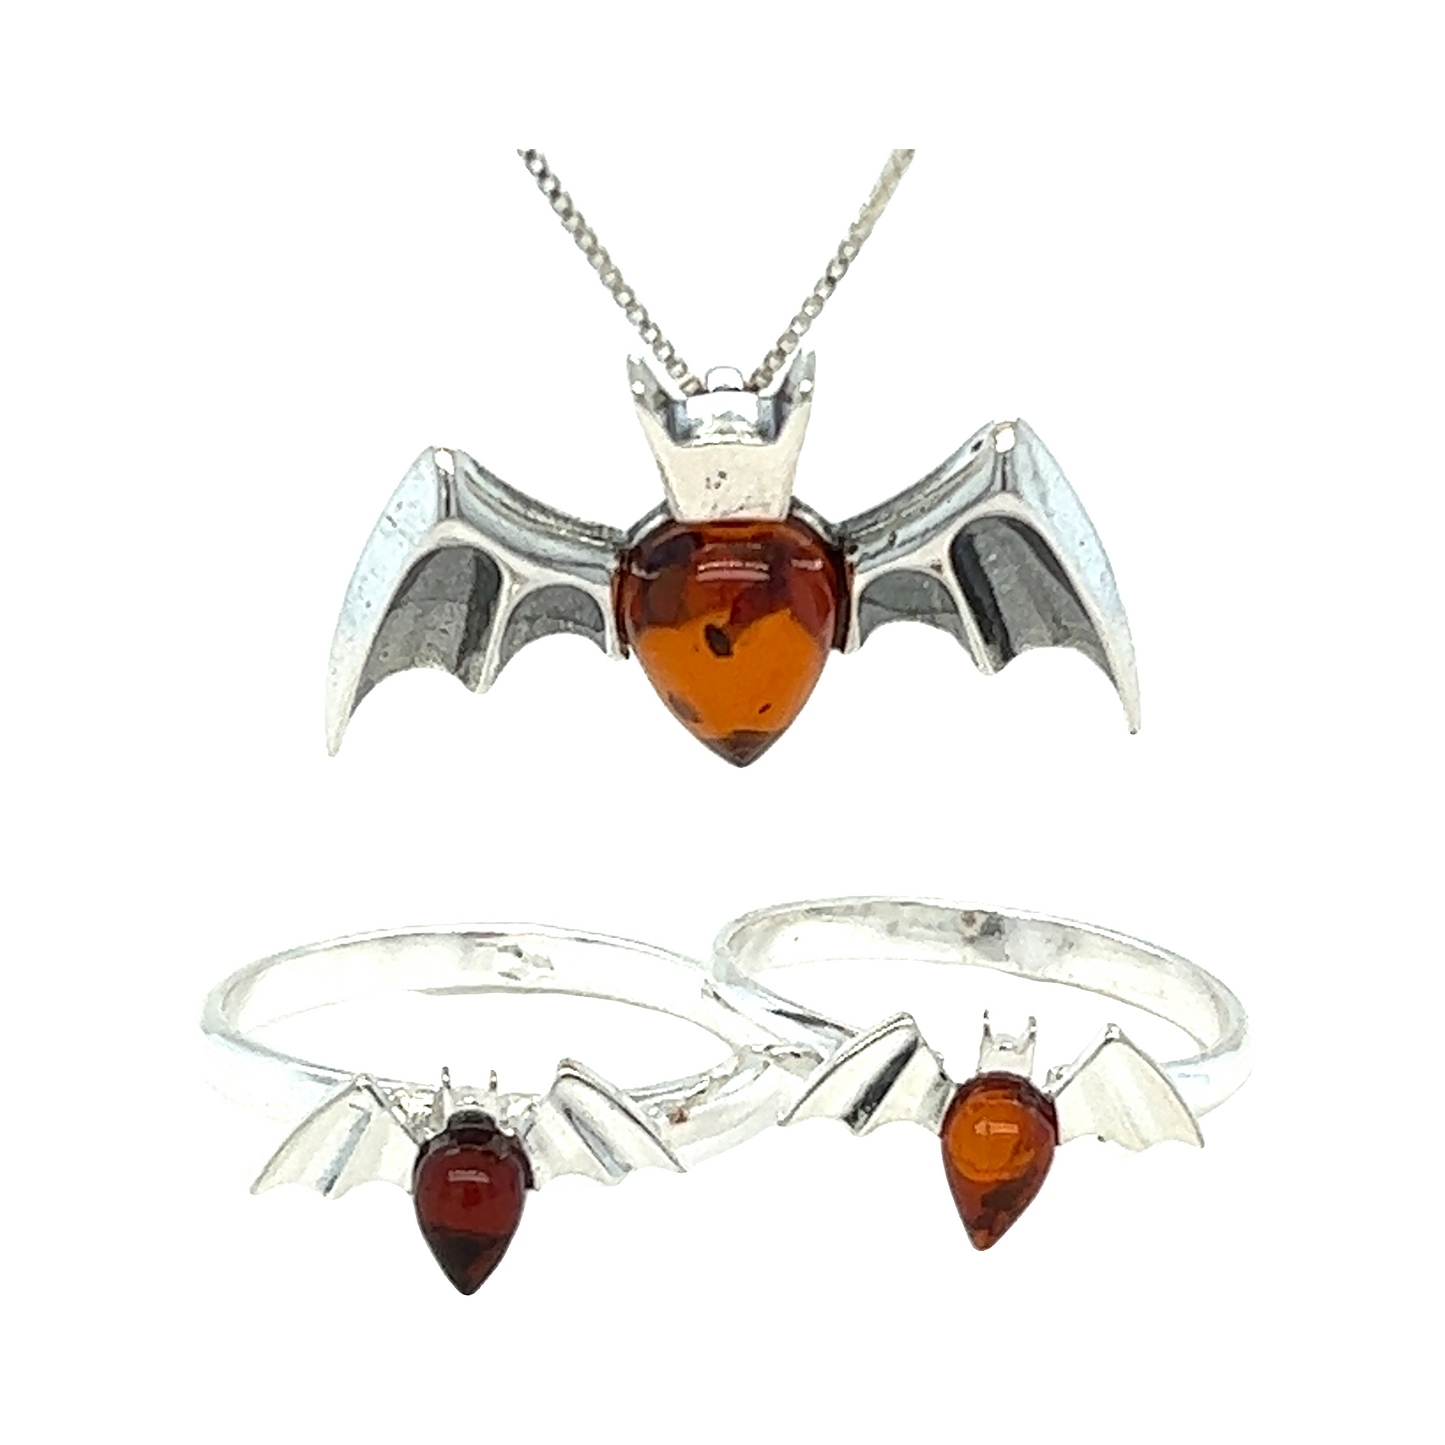 A bewitching collection of Baltic Amber Bat Ring, necklace and earrings adorned with Baltic amber, perfect for witches or anyone seeking unique jewelry pieces.